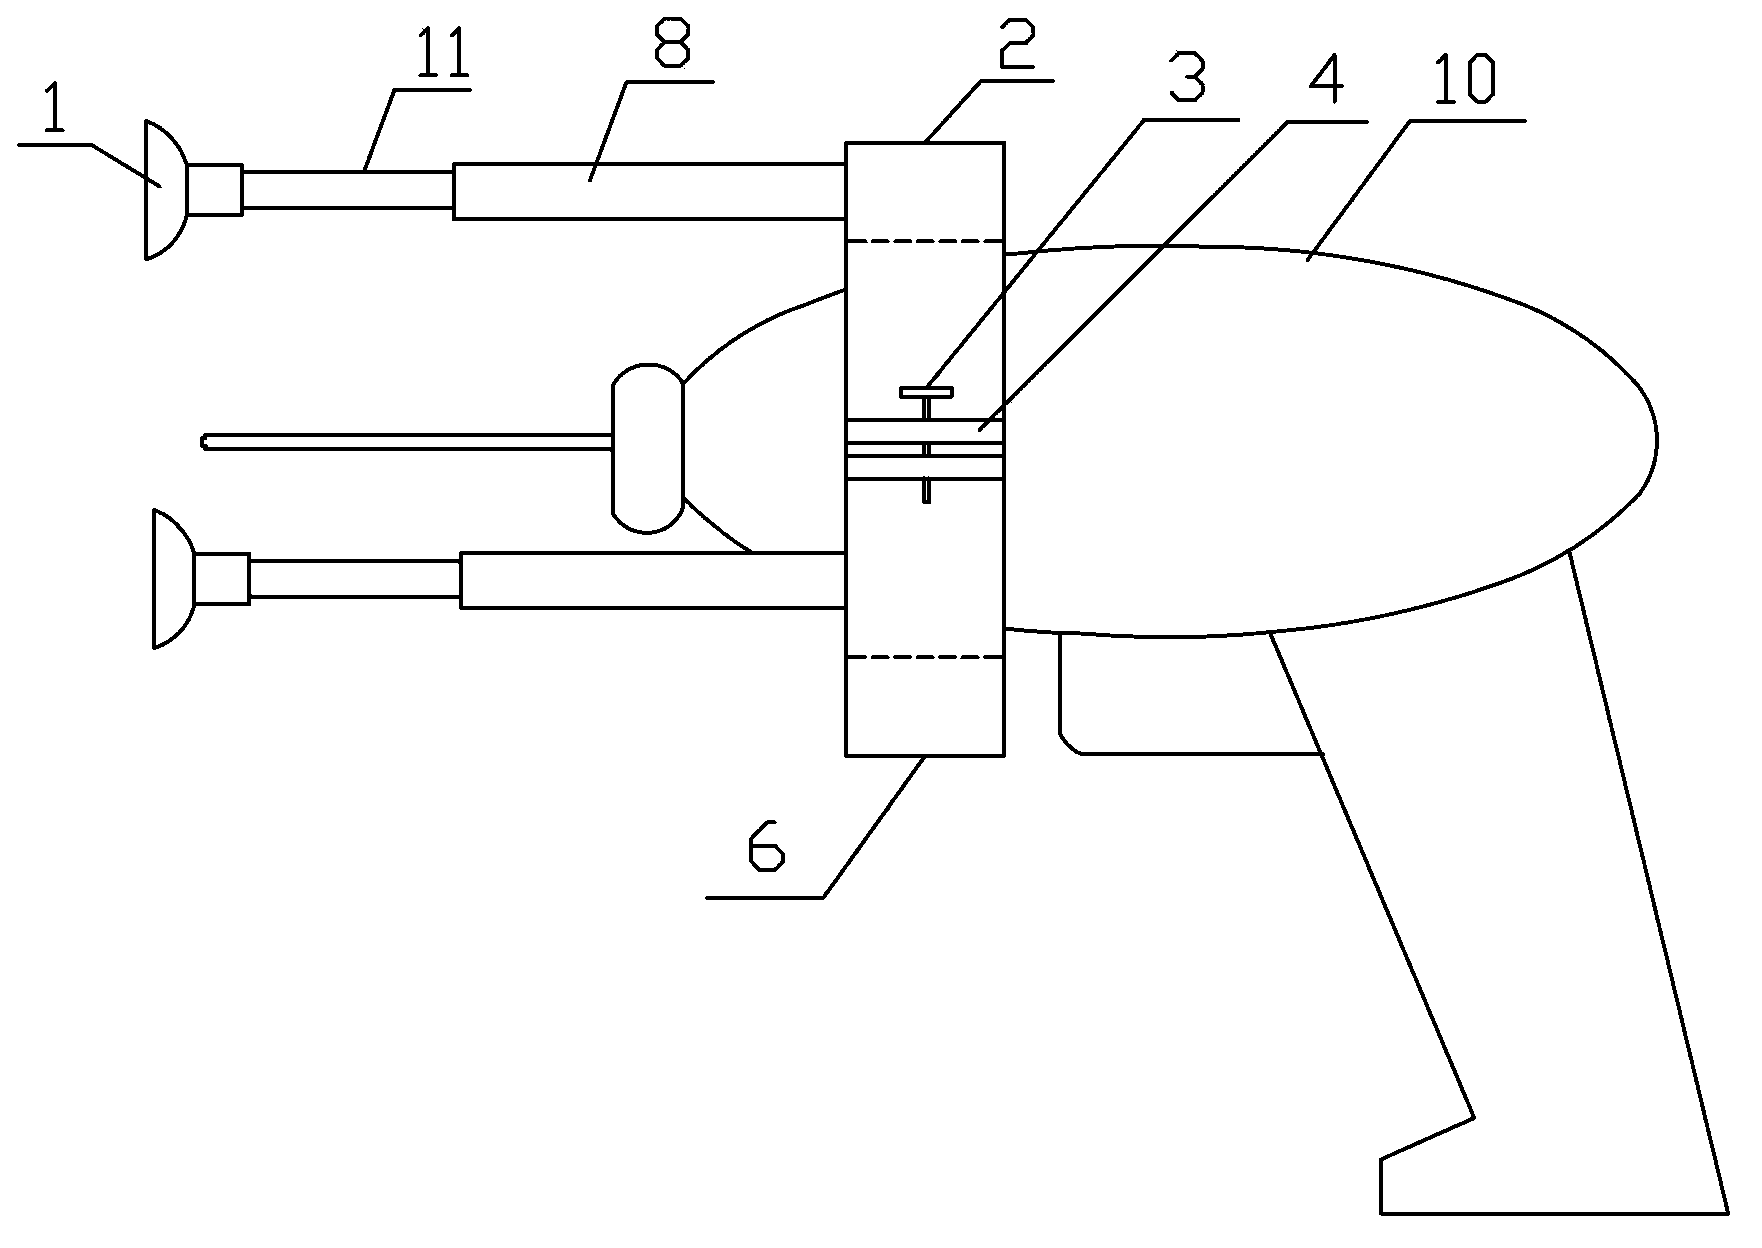 Punching positioning device